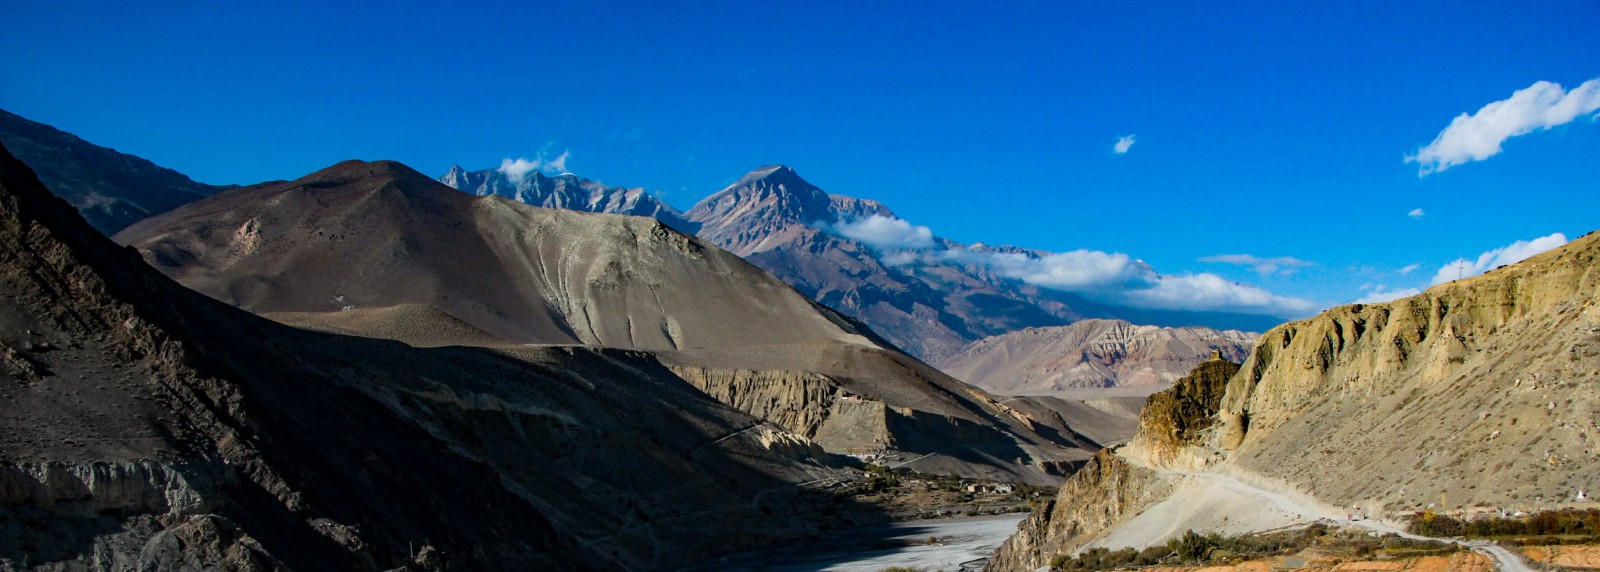 Jomsom Muktinath Trek has been one of the most exclusive trekking in the Annapurna region from the beginning.